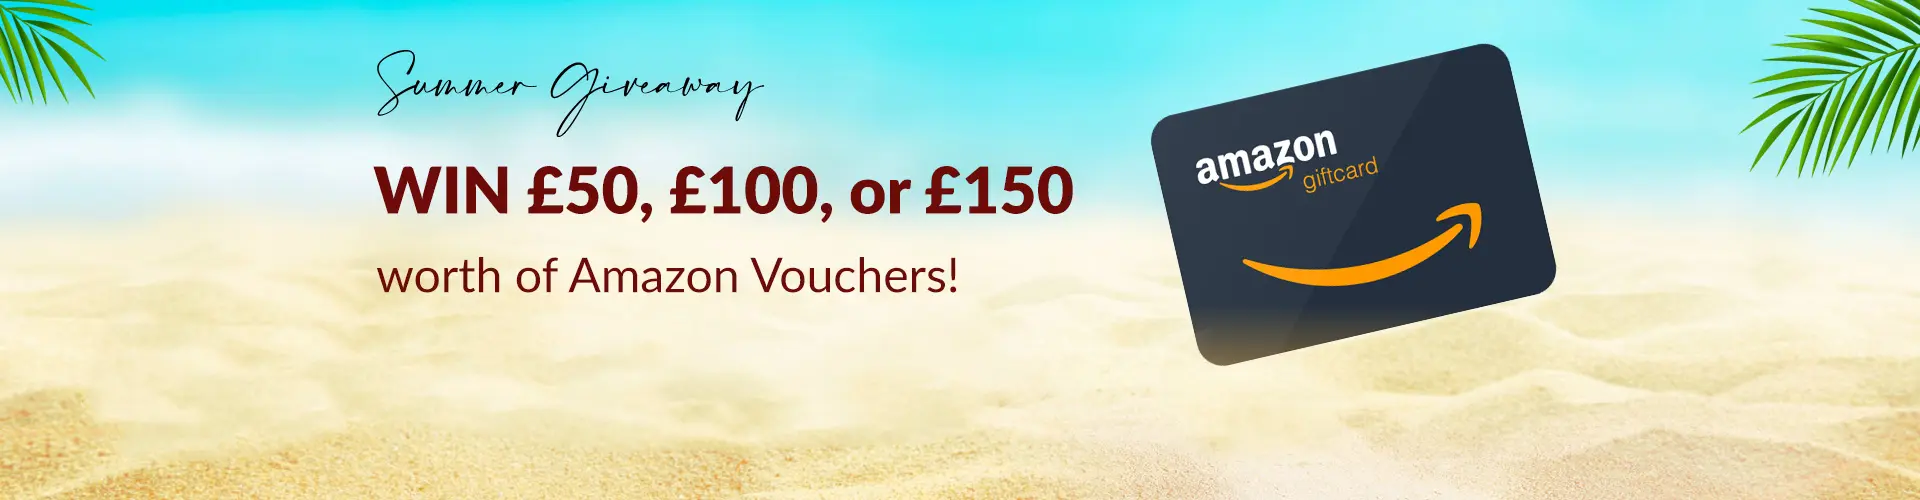 WIN £50, £100, or £150 worth of Amazon vouchers!